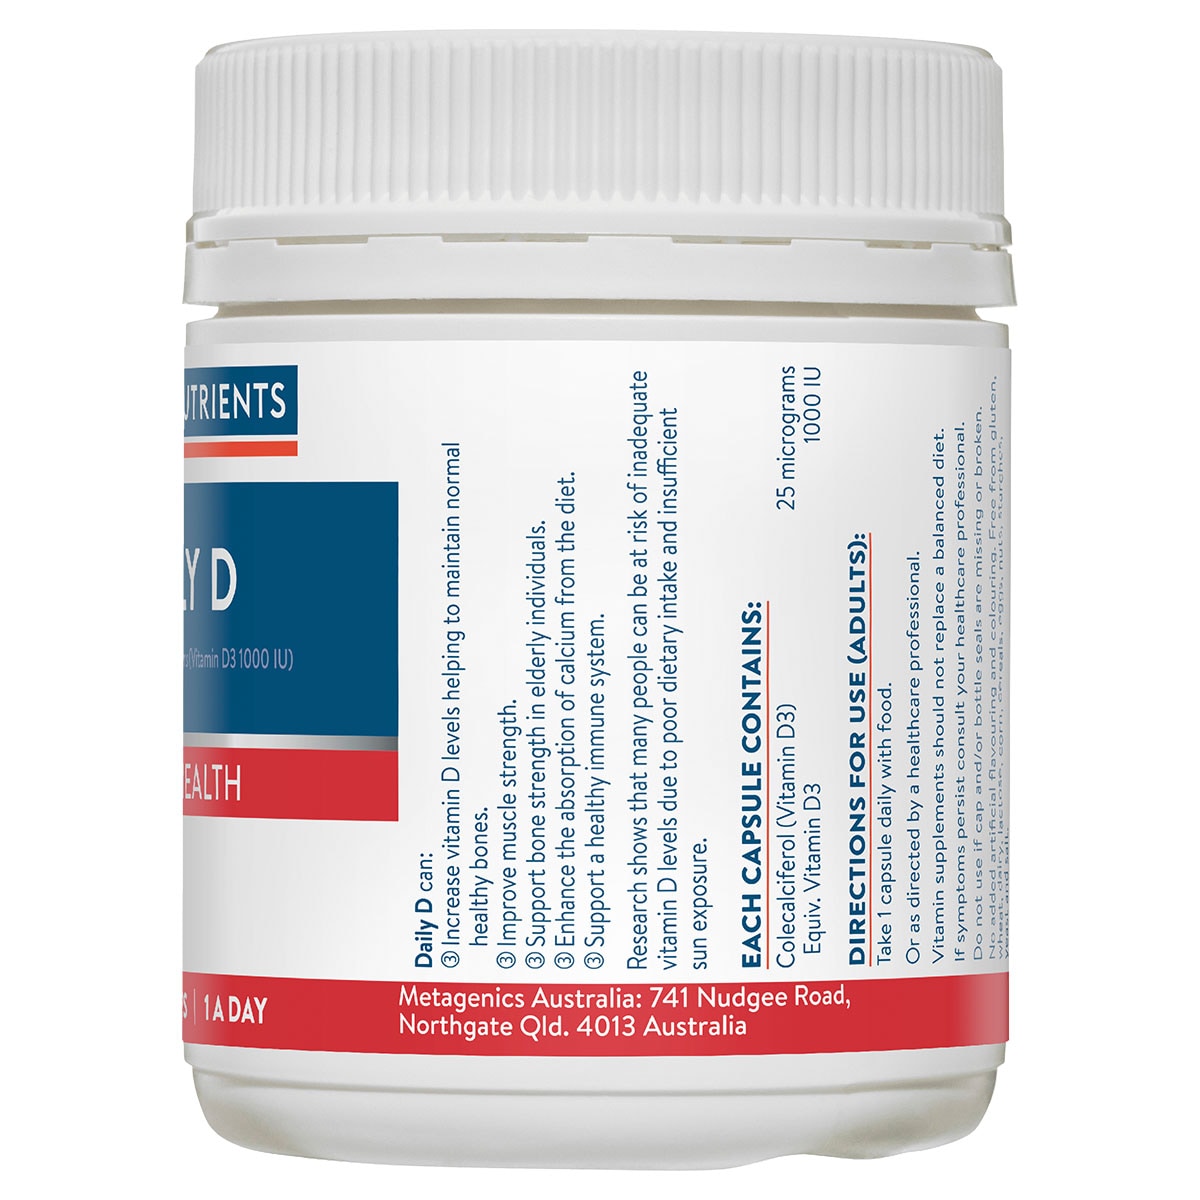 Ethical Nutrients Daily D One-a-day 270 Capsules